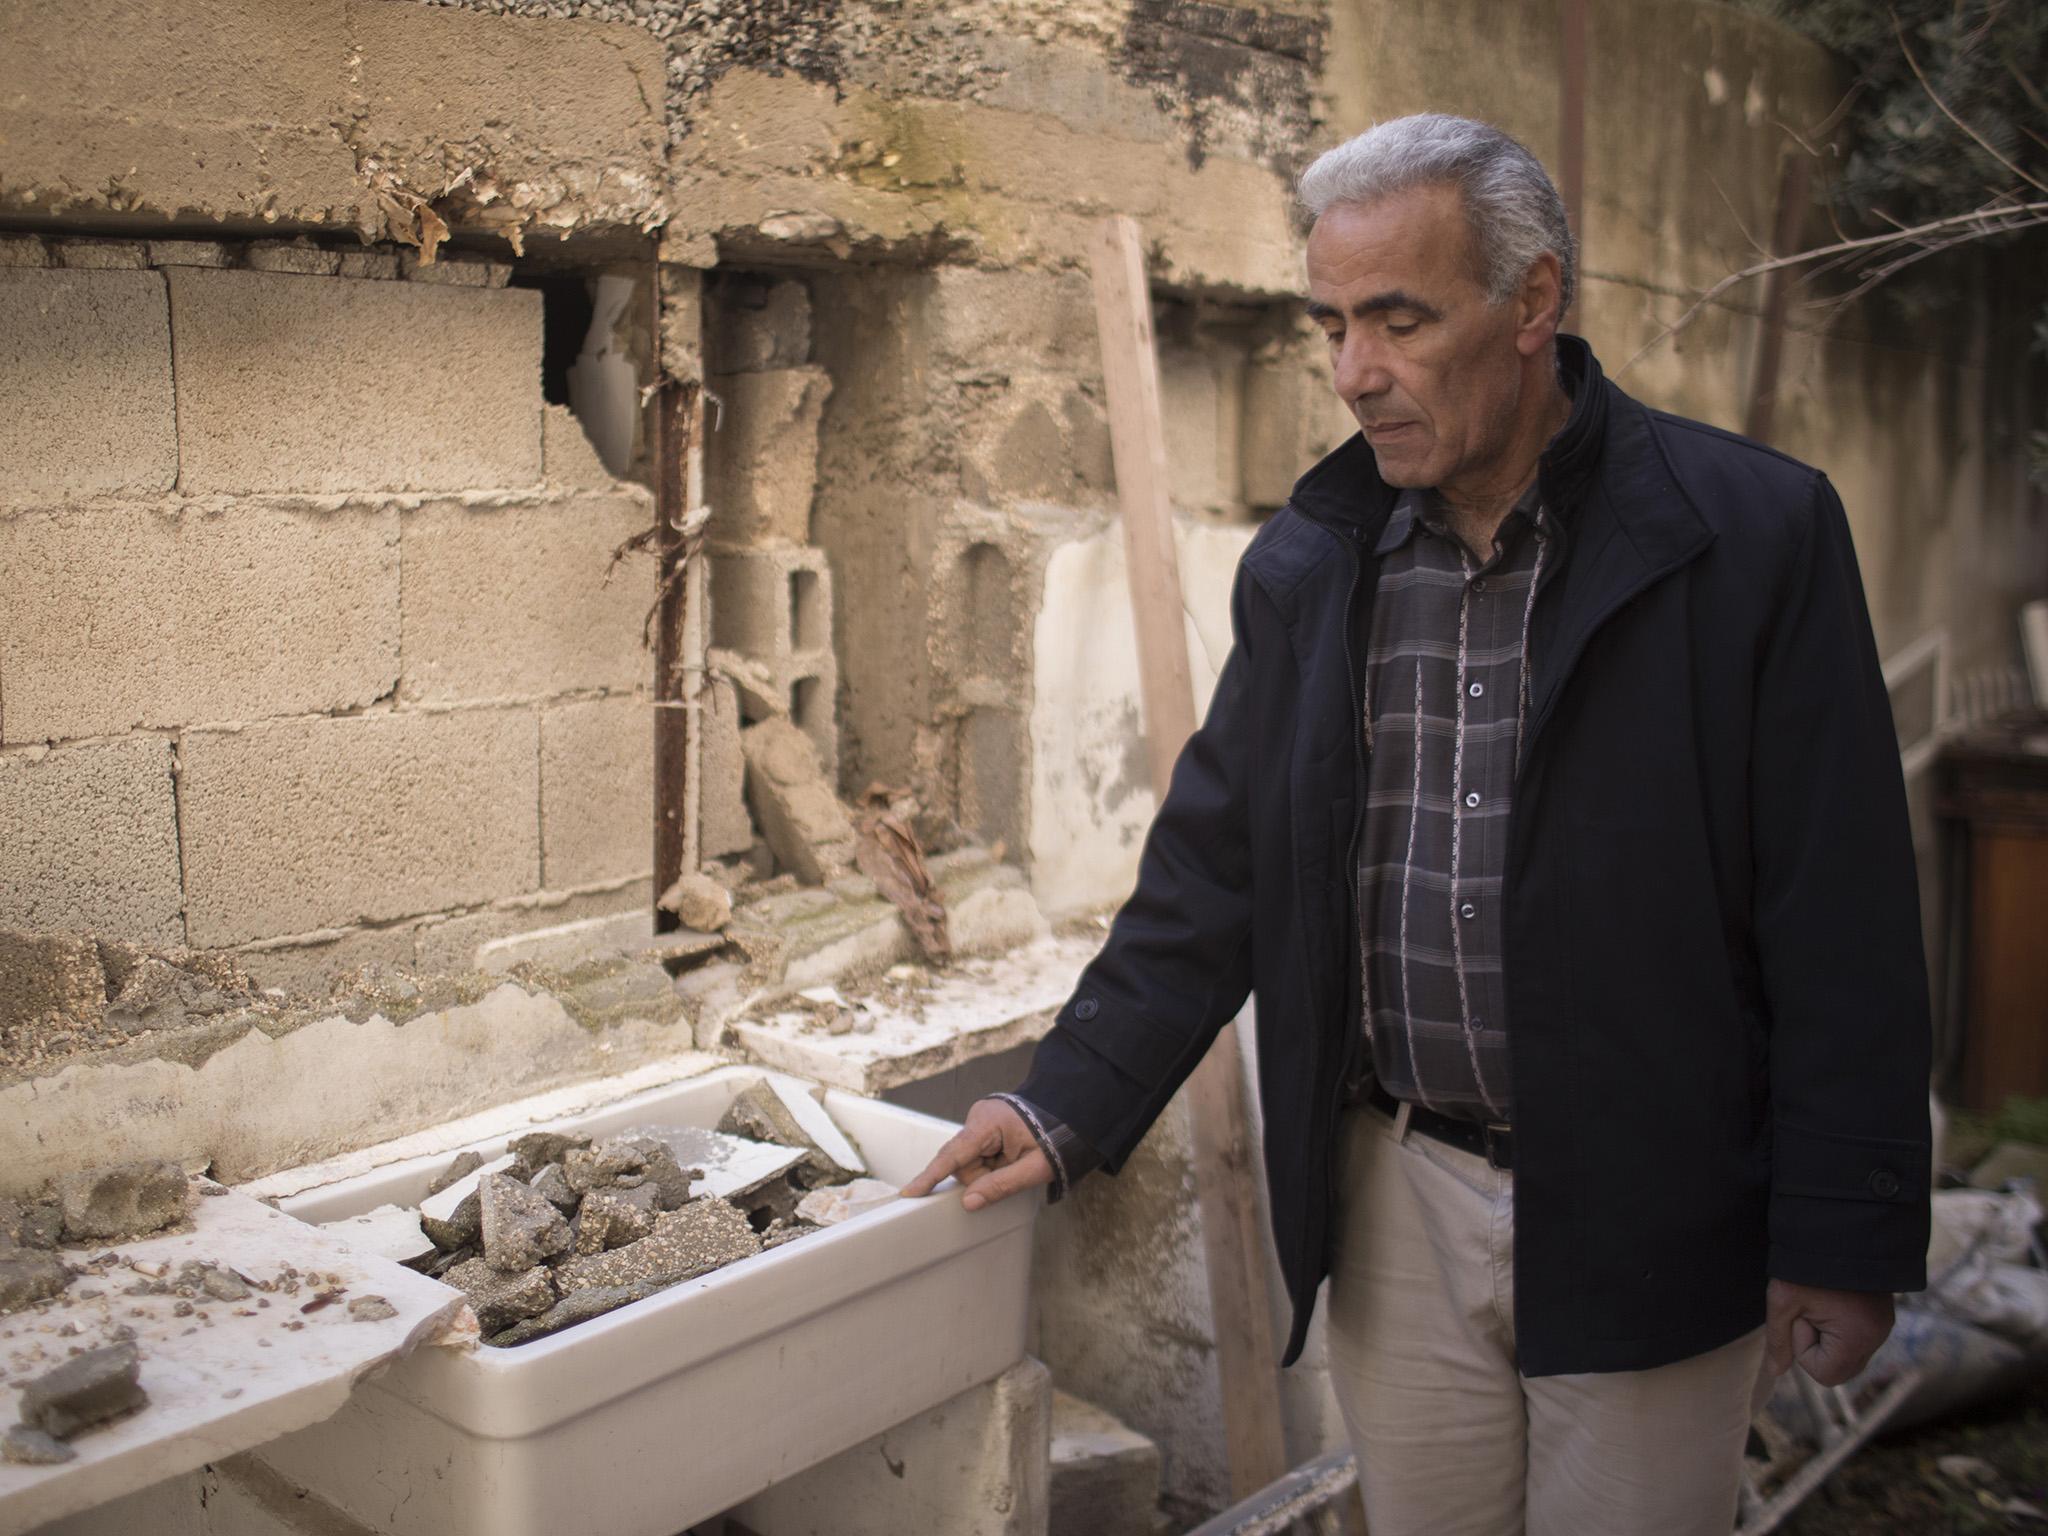 Wadi Hilweh resident Arafat Hamdan shows damage he says is caused by excavation